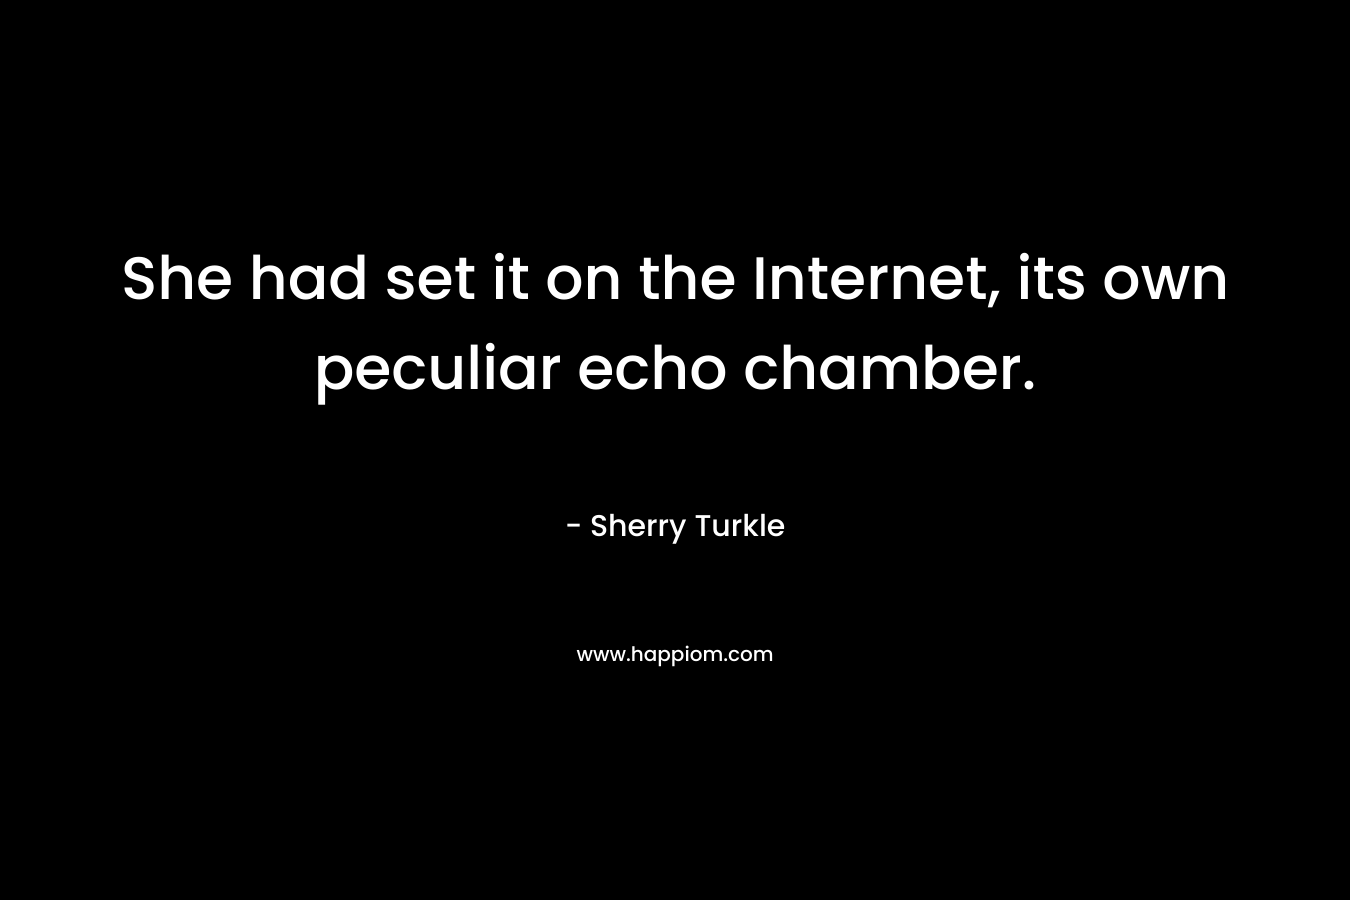 She had set it on the Internet, its own peculiar echo chamber. – Sherry Turkle